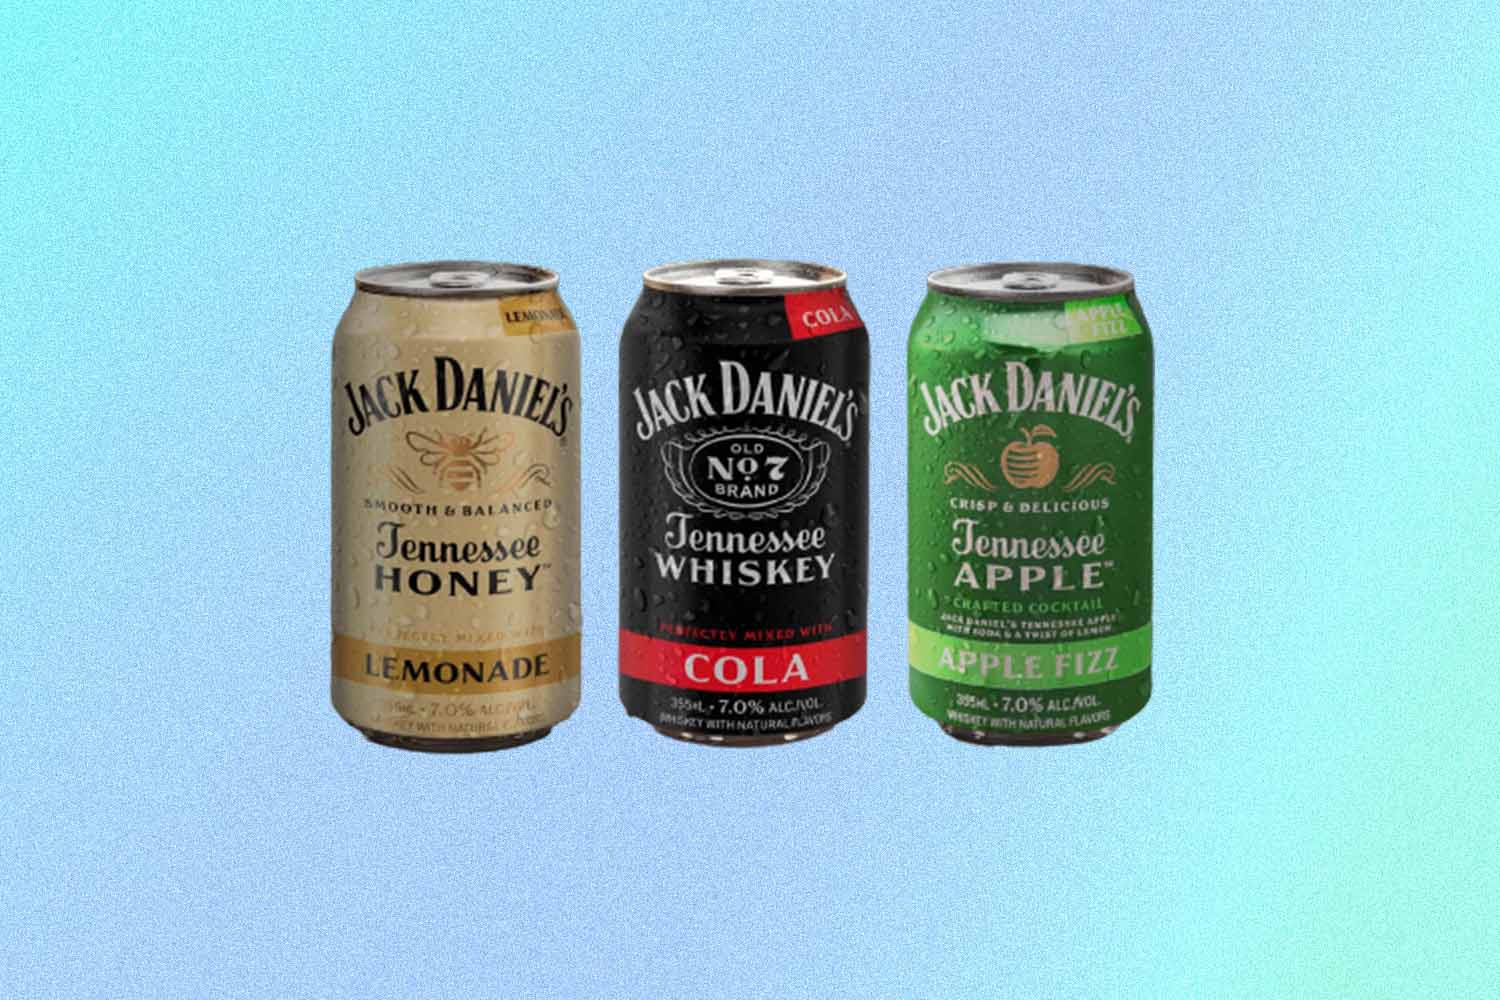 Canned drinks from Jack Daniel's